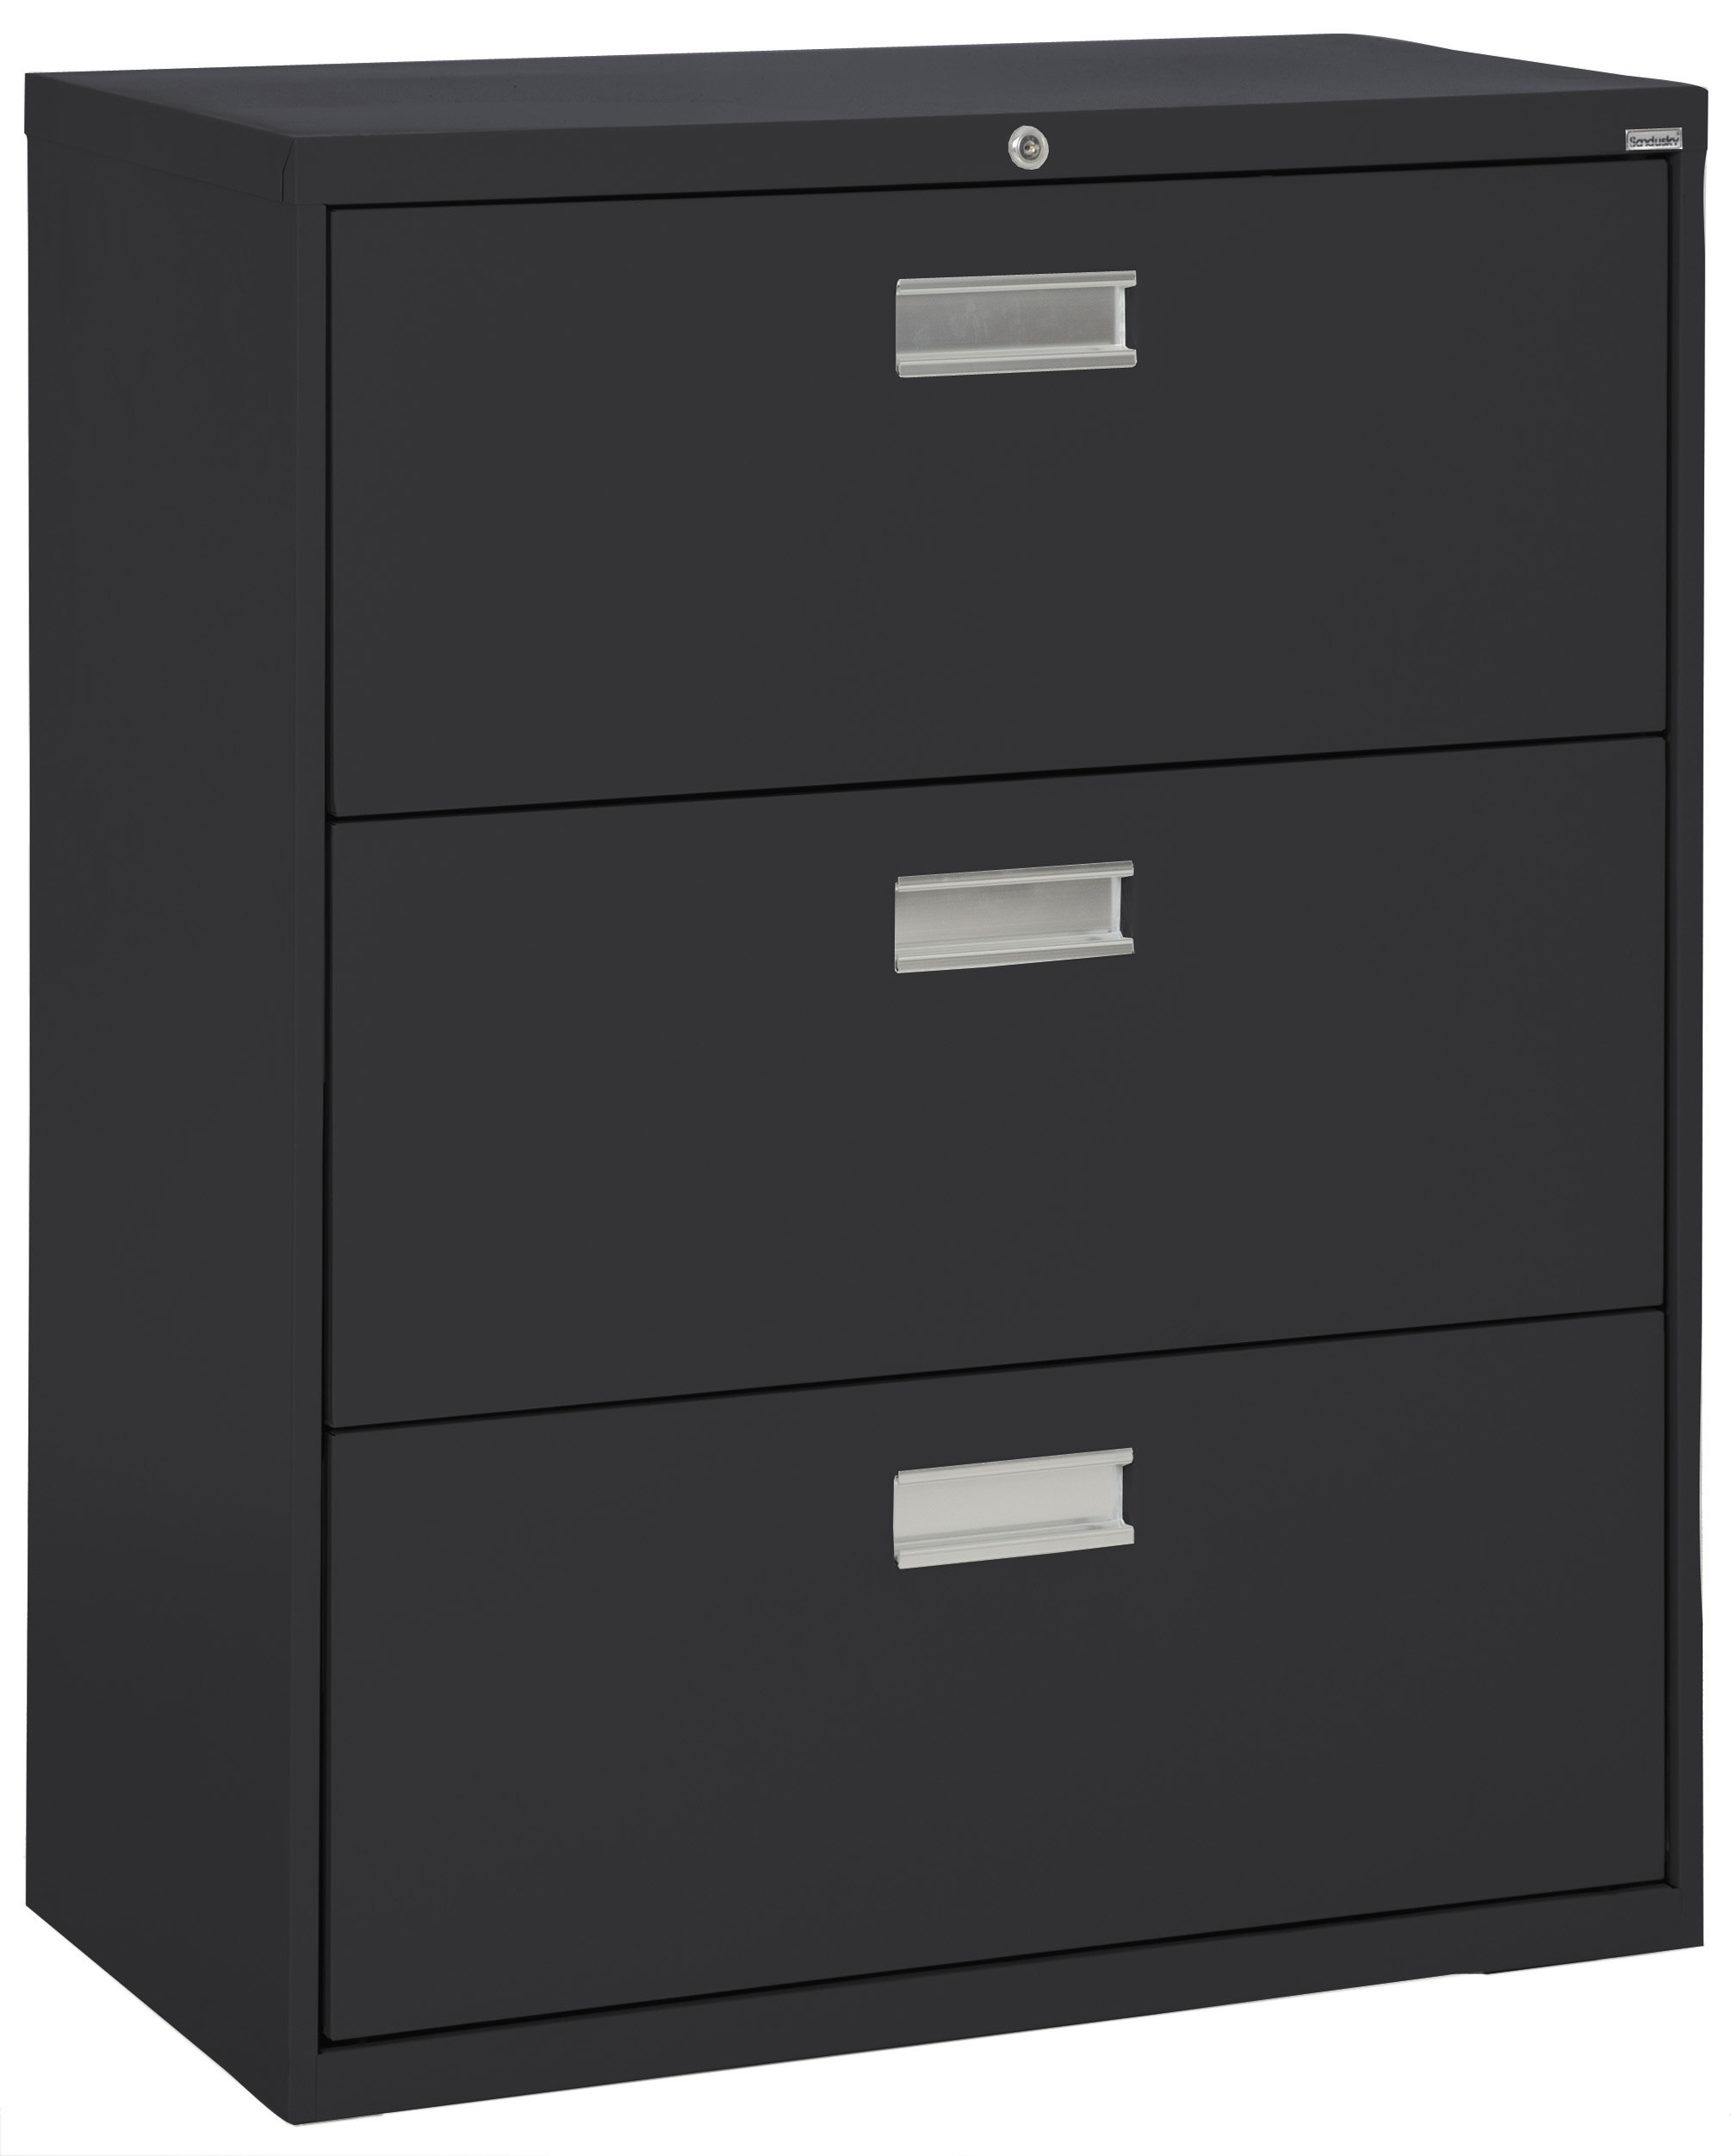 Sandusky 3 Drawer Lateral Filing Cabinet Reviews Wayfairca with regard to dimensions 2010 X 2503